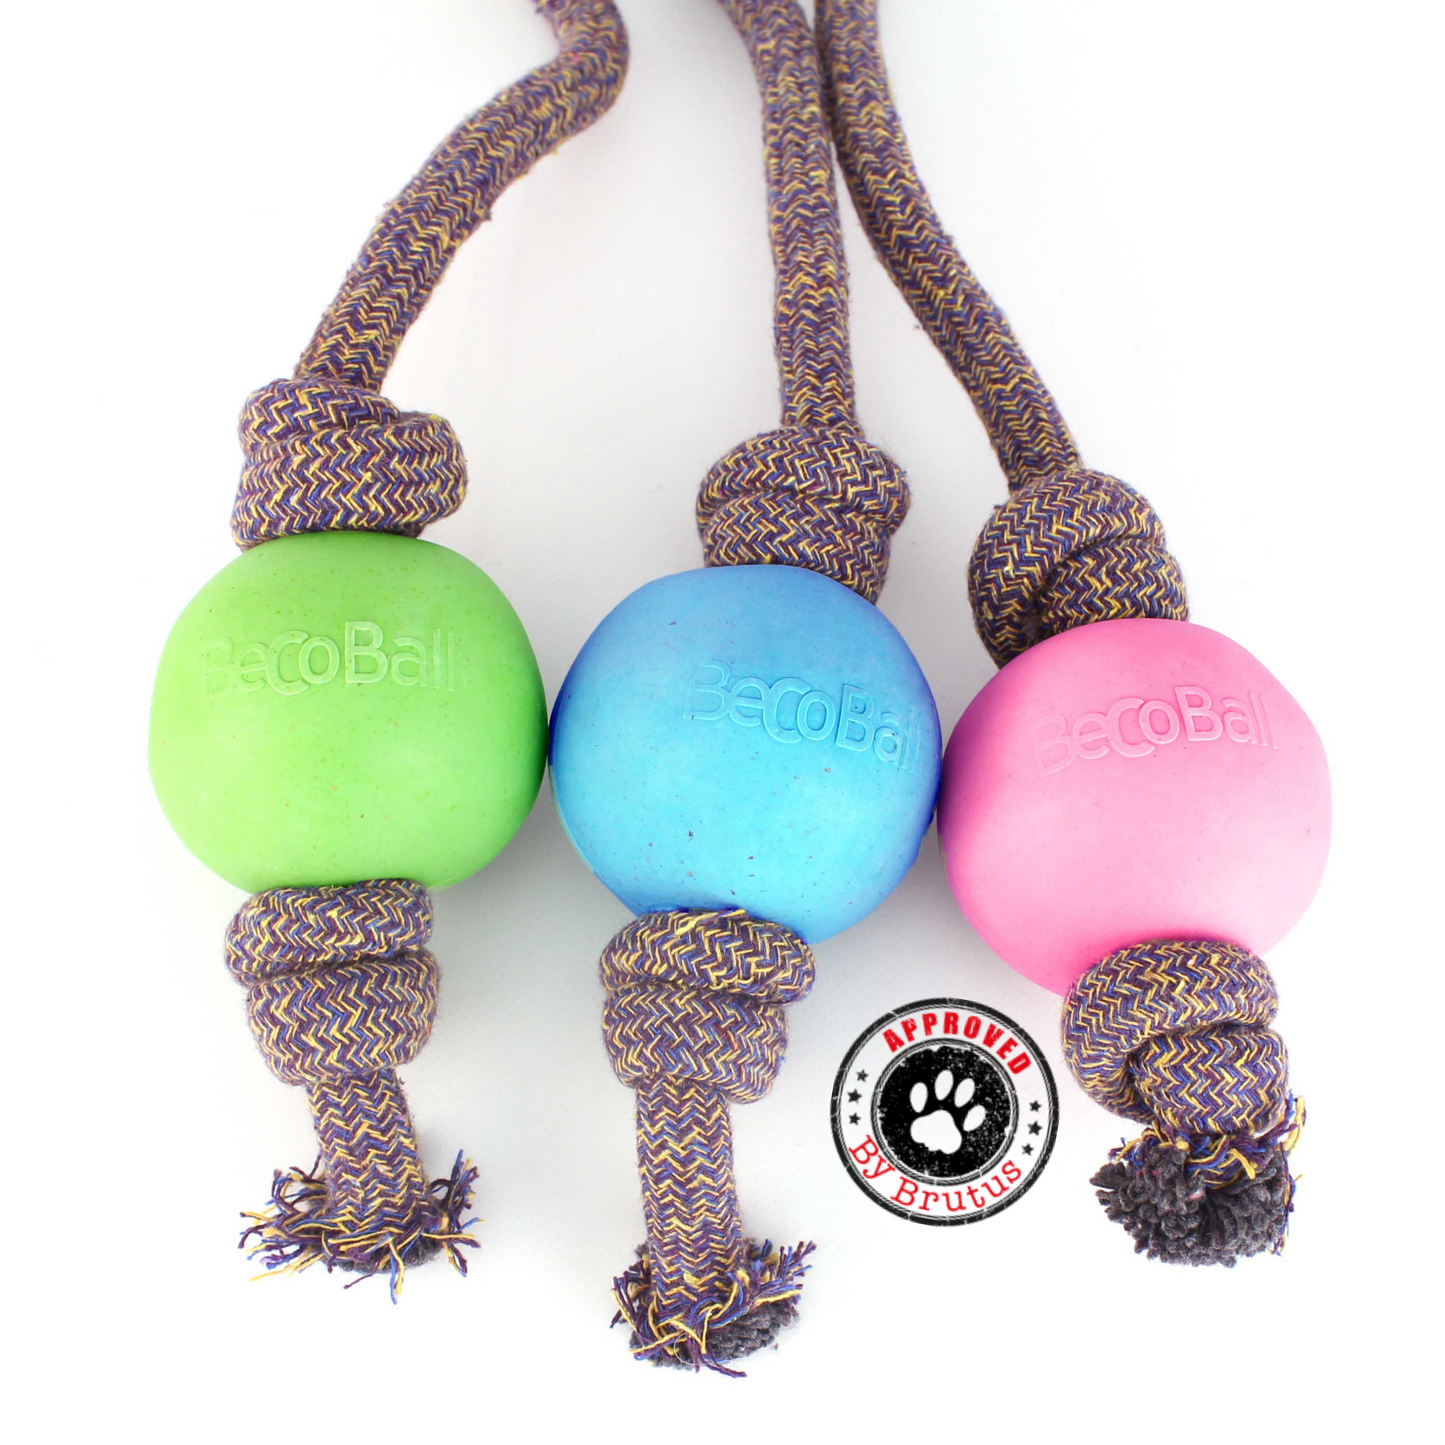 Beco Ball on a Rope dog toy - pink, blue, green-0